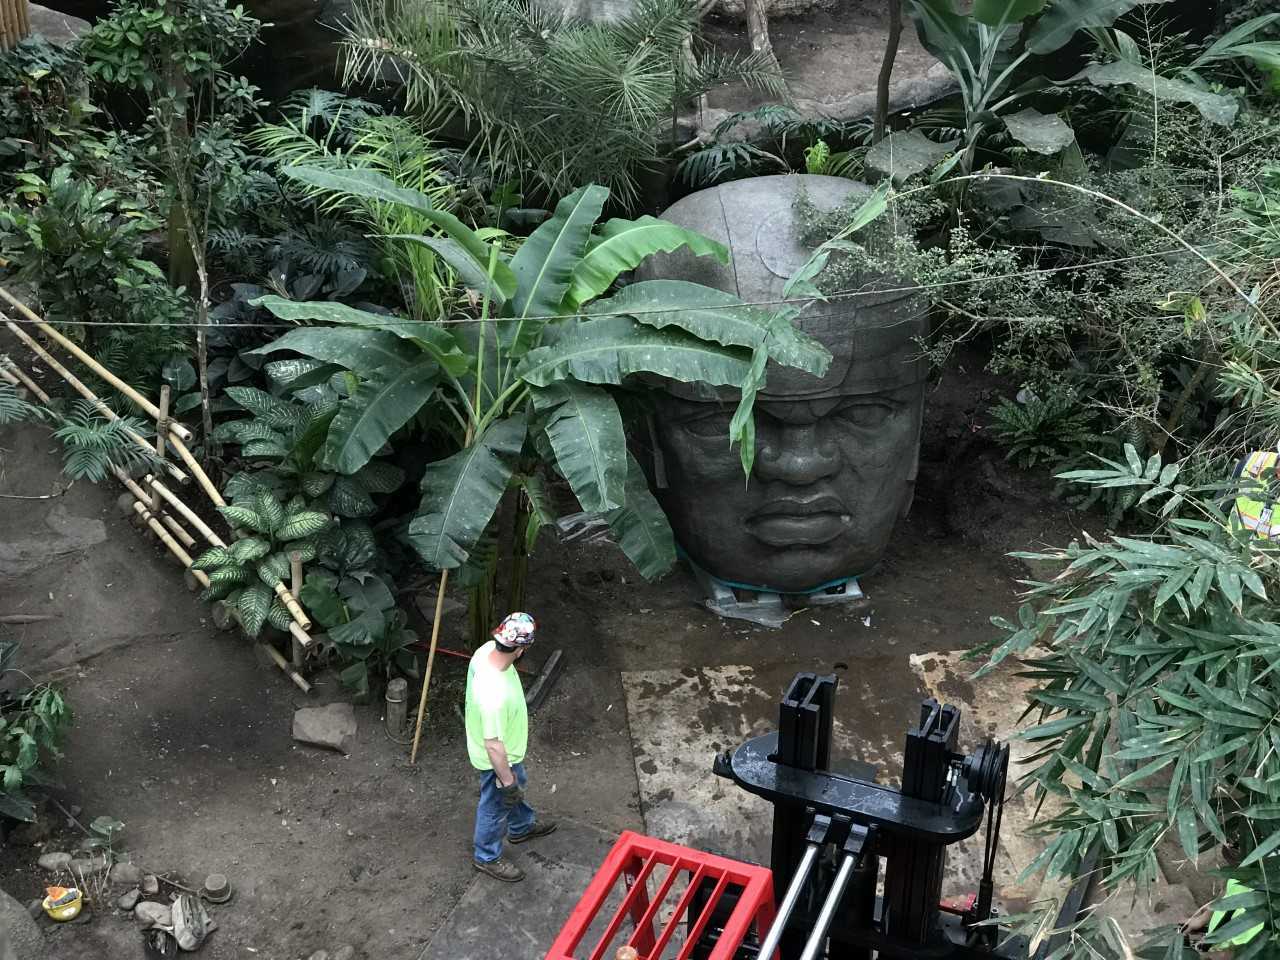 New statue turning heads at Omaha zoo